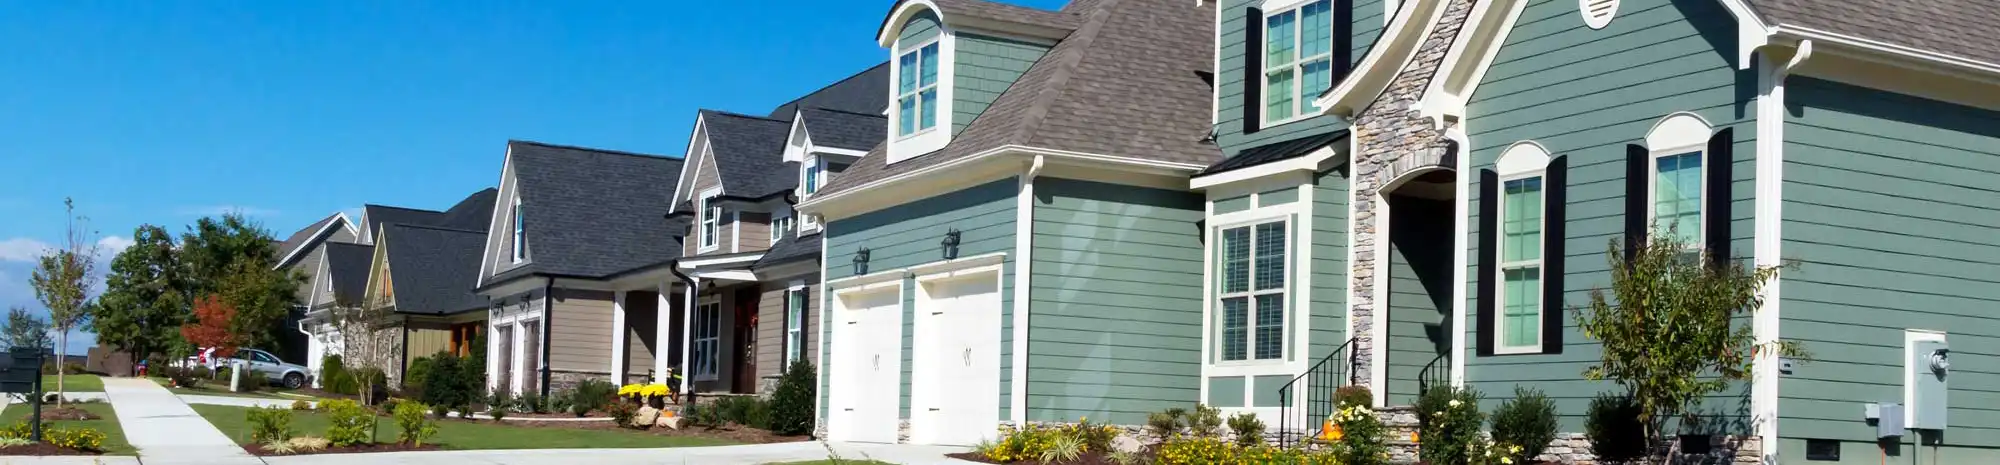 Street lined with houses | Summit Pest Control Serving Tigard, OR